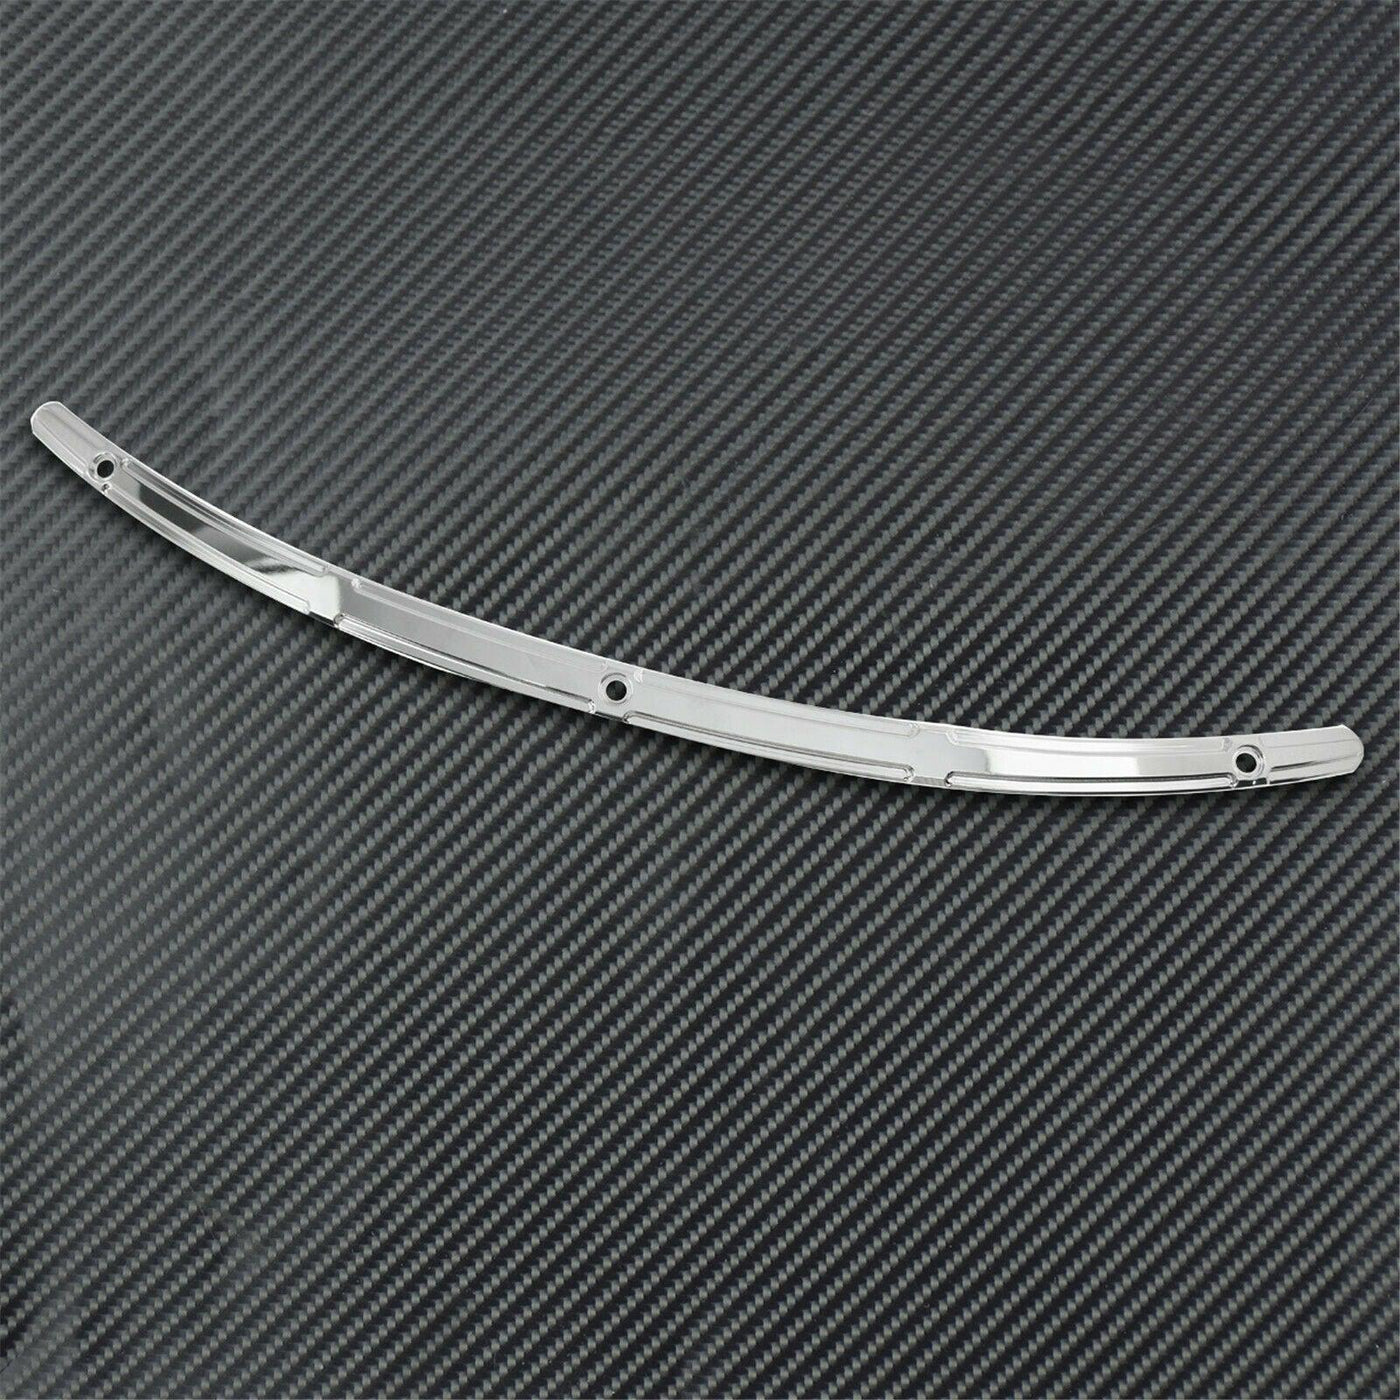 Chrome Raised Windshield Trim Fit For Harley Touring Glide Ultra Limited 2014-20 - Moto Life Products